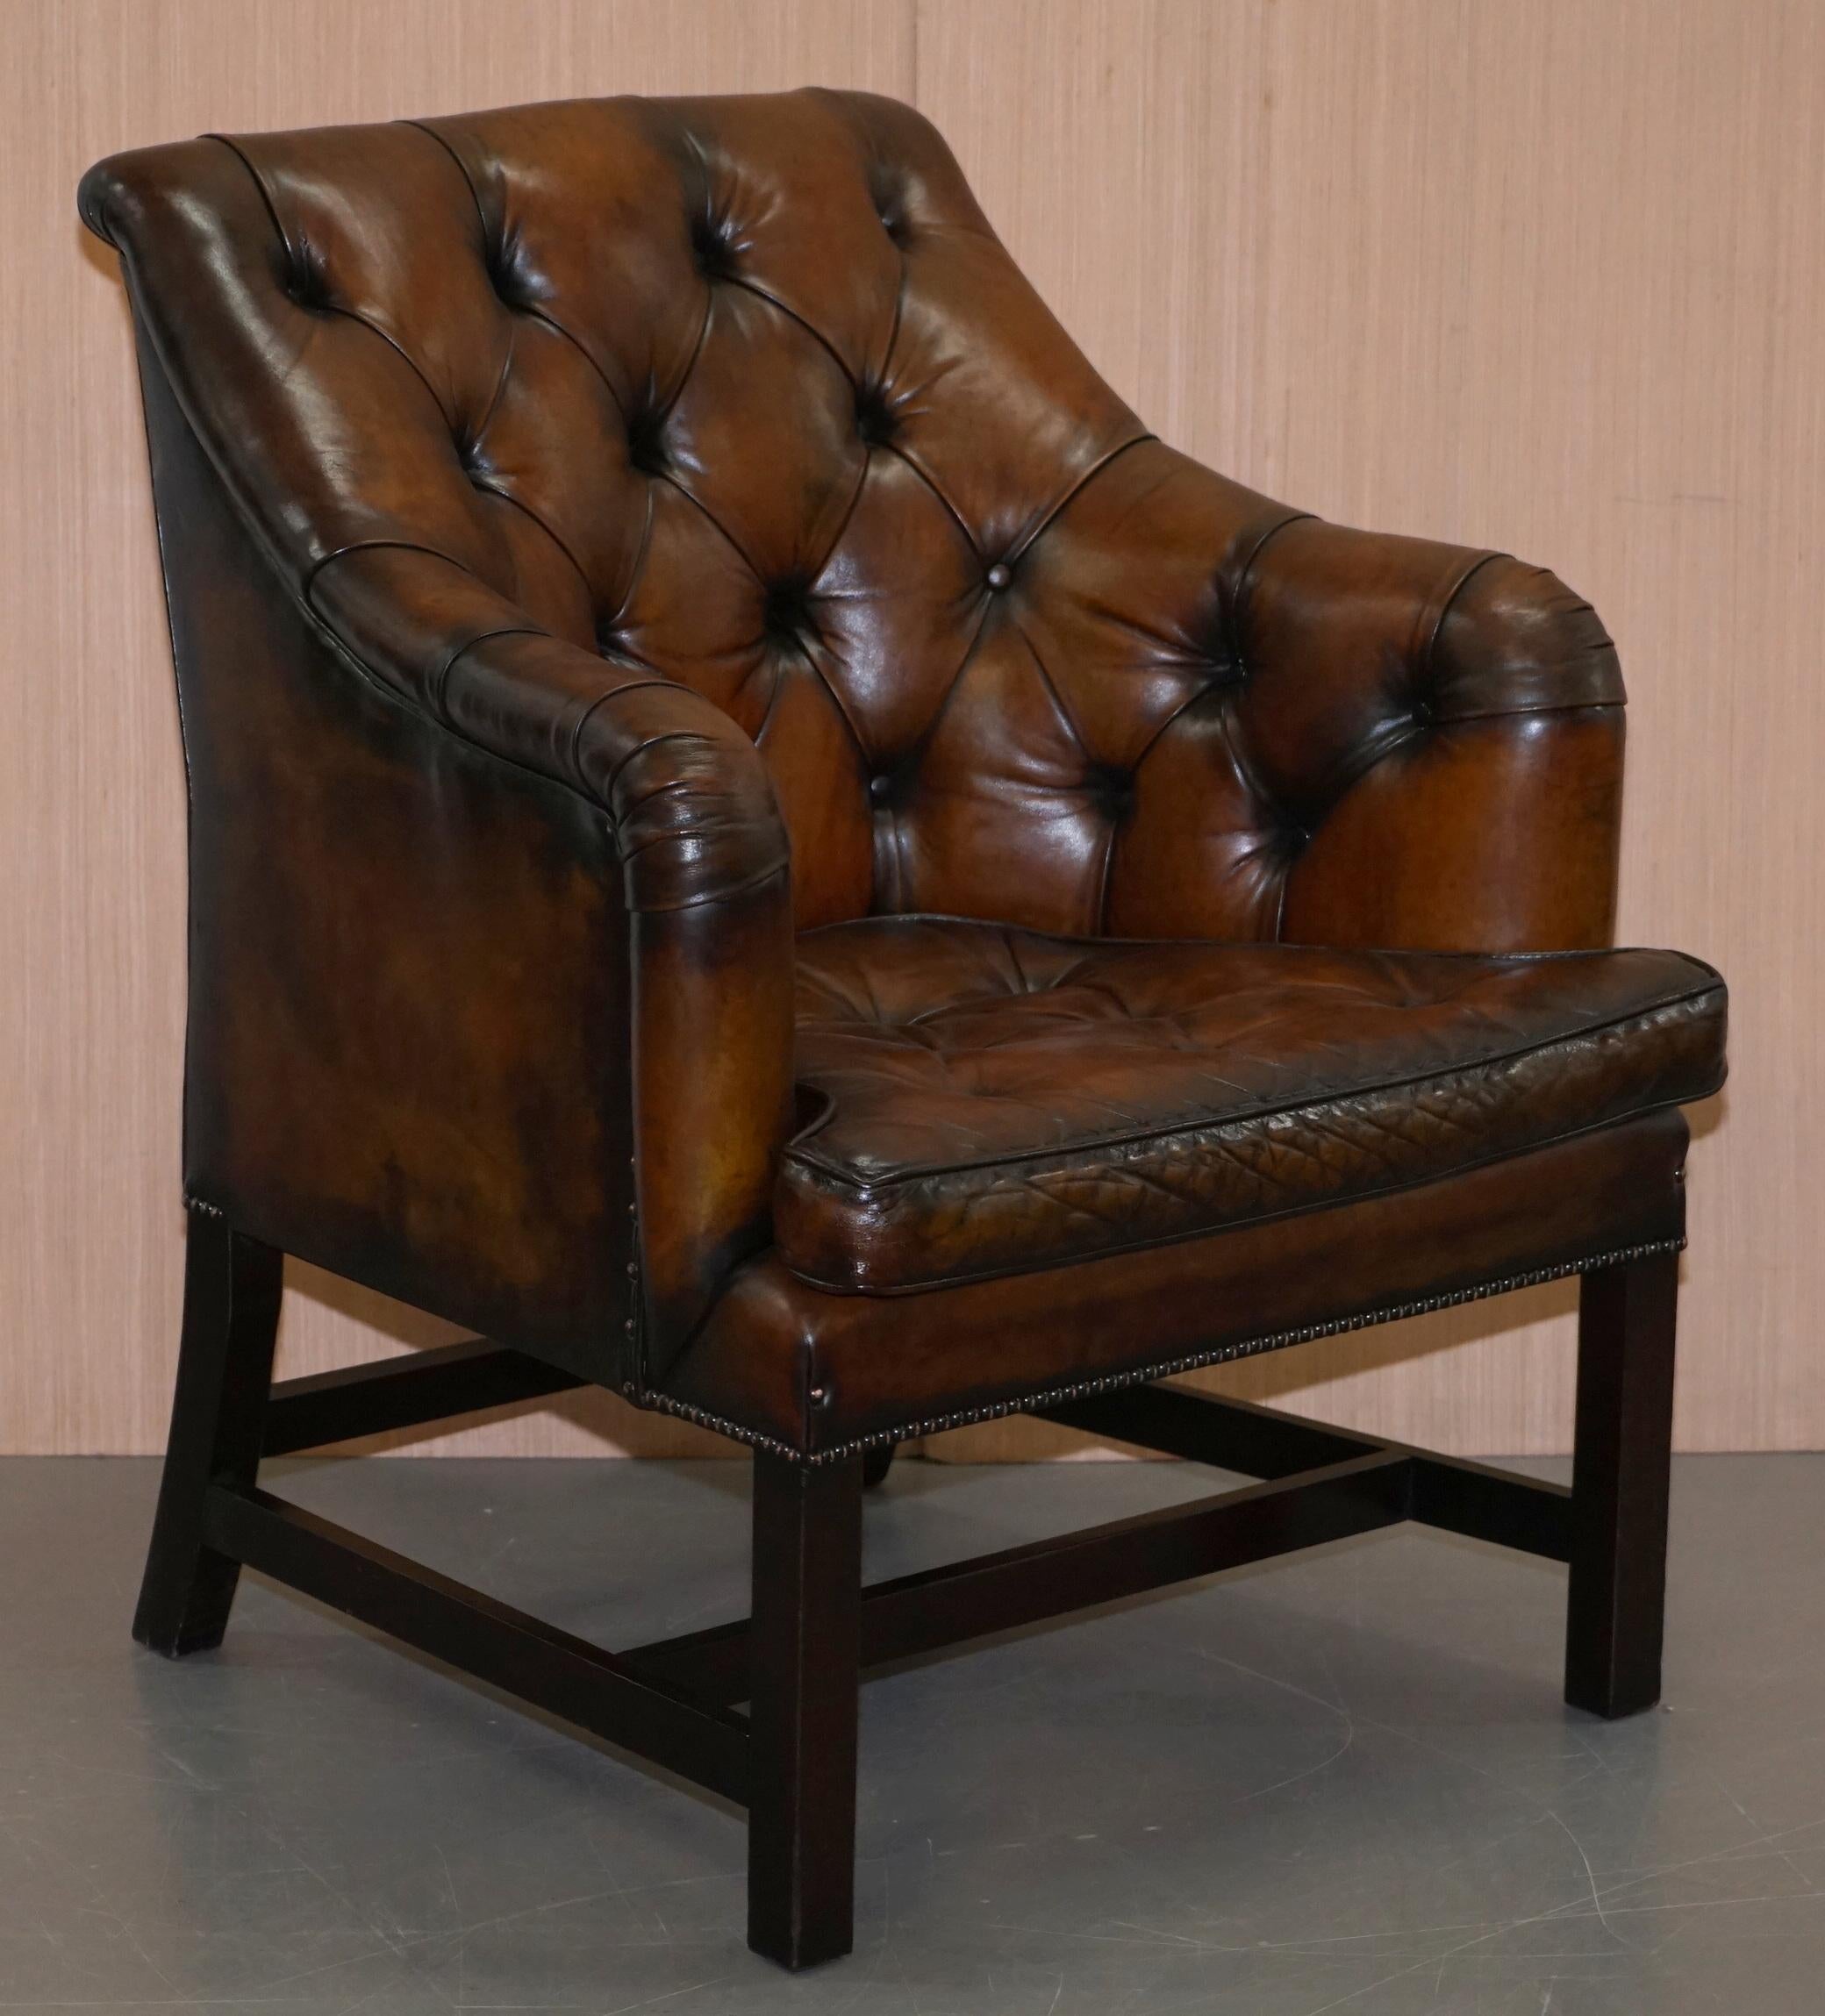 We are delighted to offer for sale this stunning pair of fully restored George Smith Whiskey brown Georgian style Occasional or desk armchairs RRP £10,400 for the pair.

A true masterpiece of an armchair, this chair looks sublime in any setting